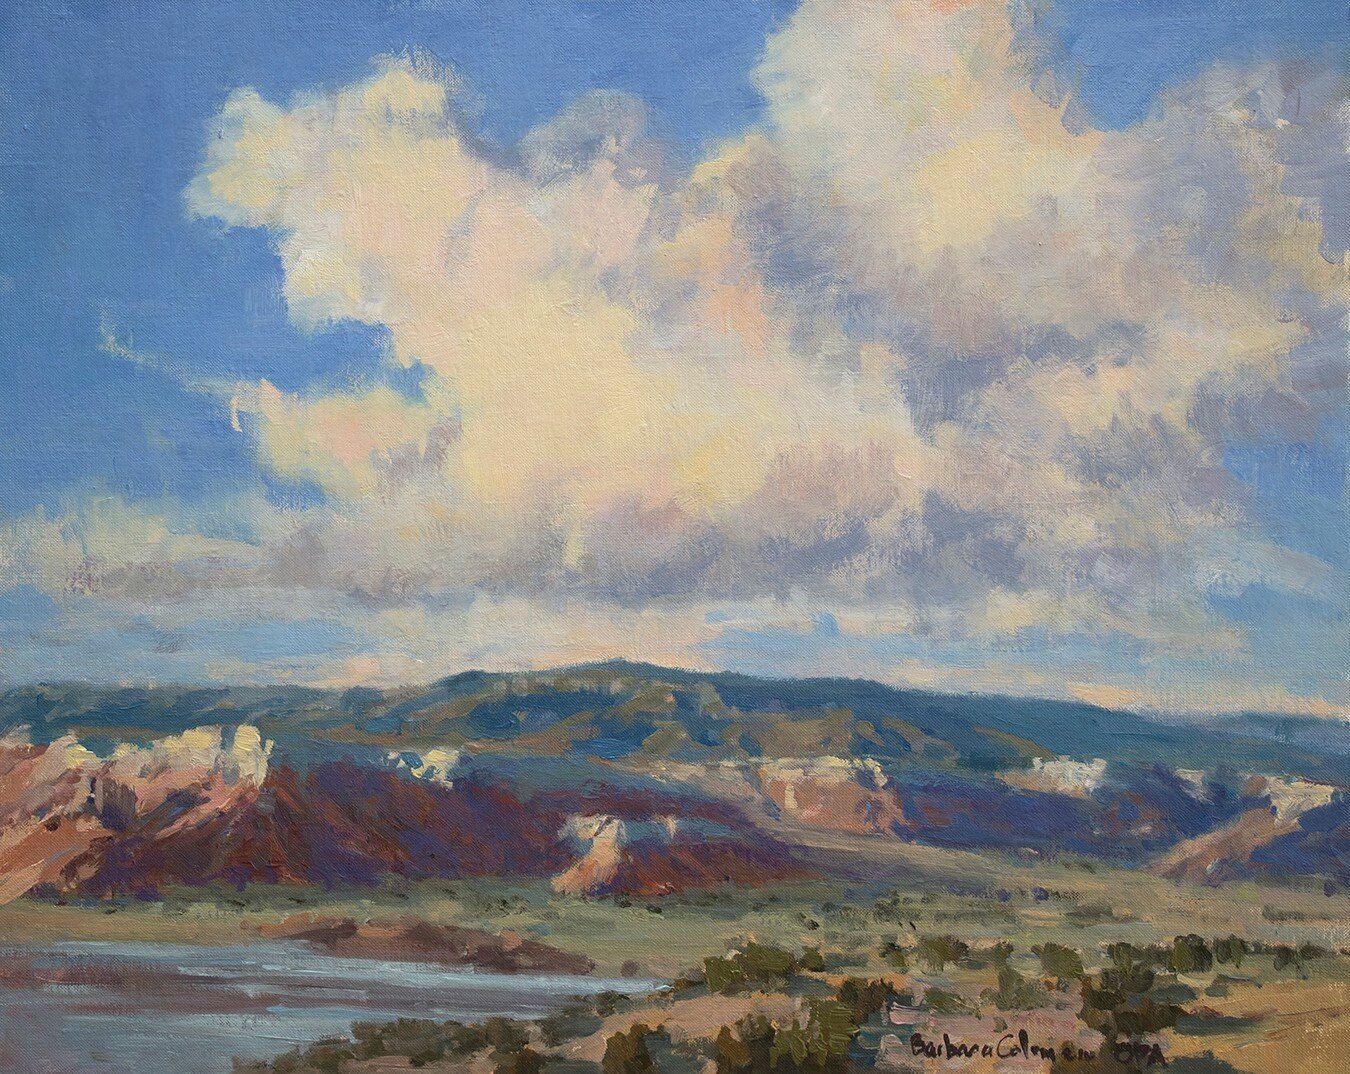 &quot;A Cloud Dance&quot;, 16x20, oil. I recently finished this piece. It was inspired by the 8x10 plein air posted earlier. I wanted to capture the ever-changing nature of light, as it cascaded over the landscape, illuminating the intricacies of the